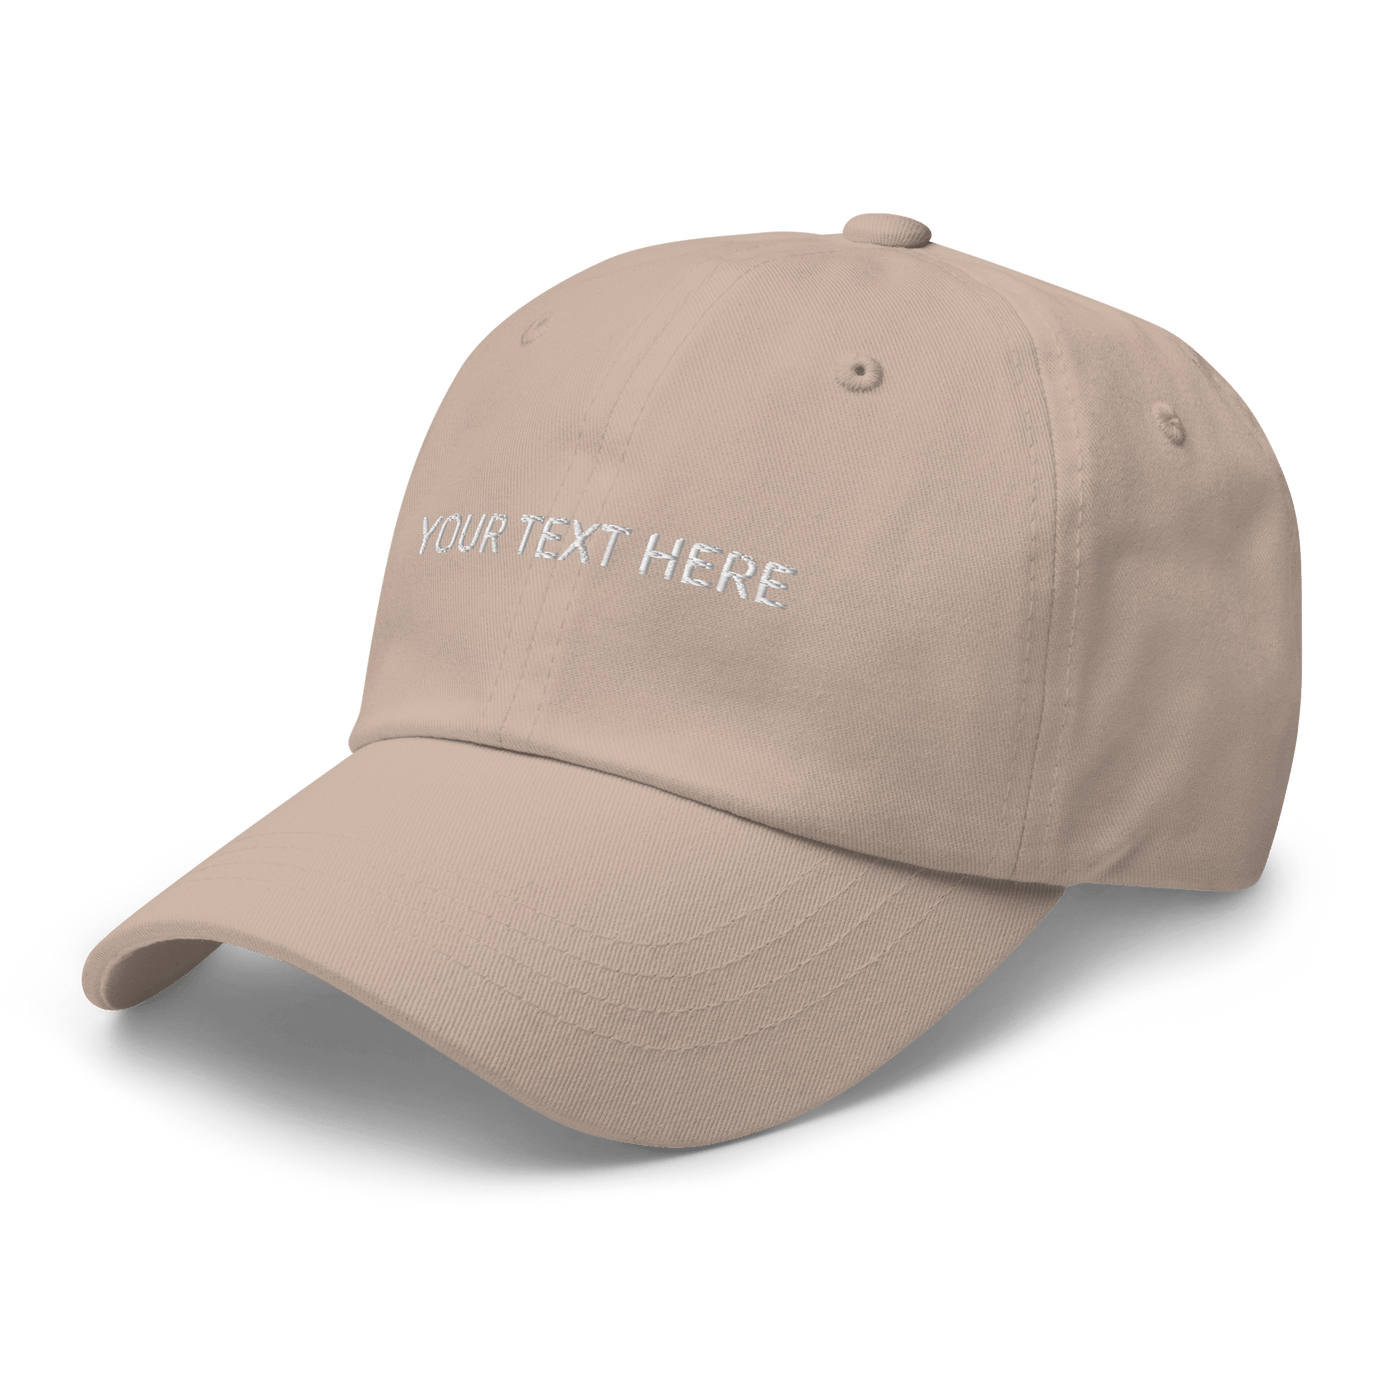 Customize Your own Dad Hat - Stone - - Just Another Cap Store